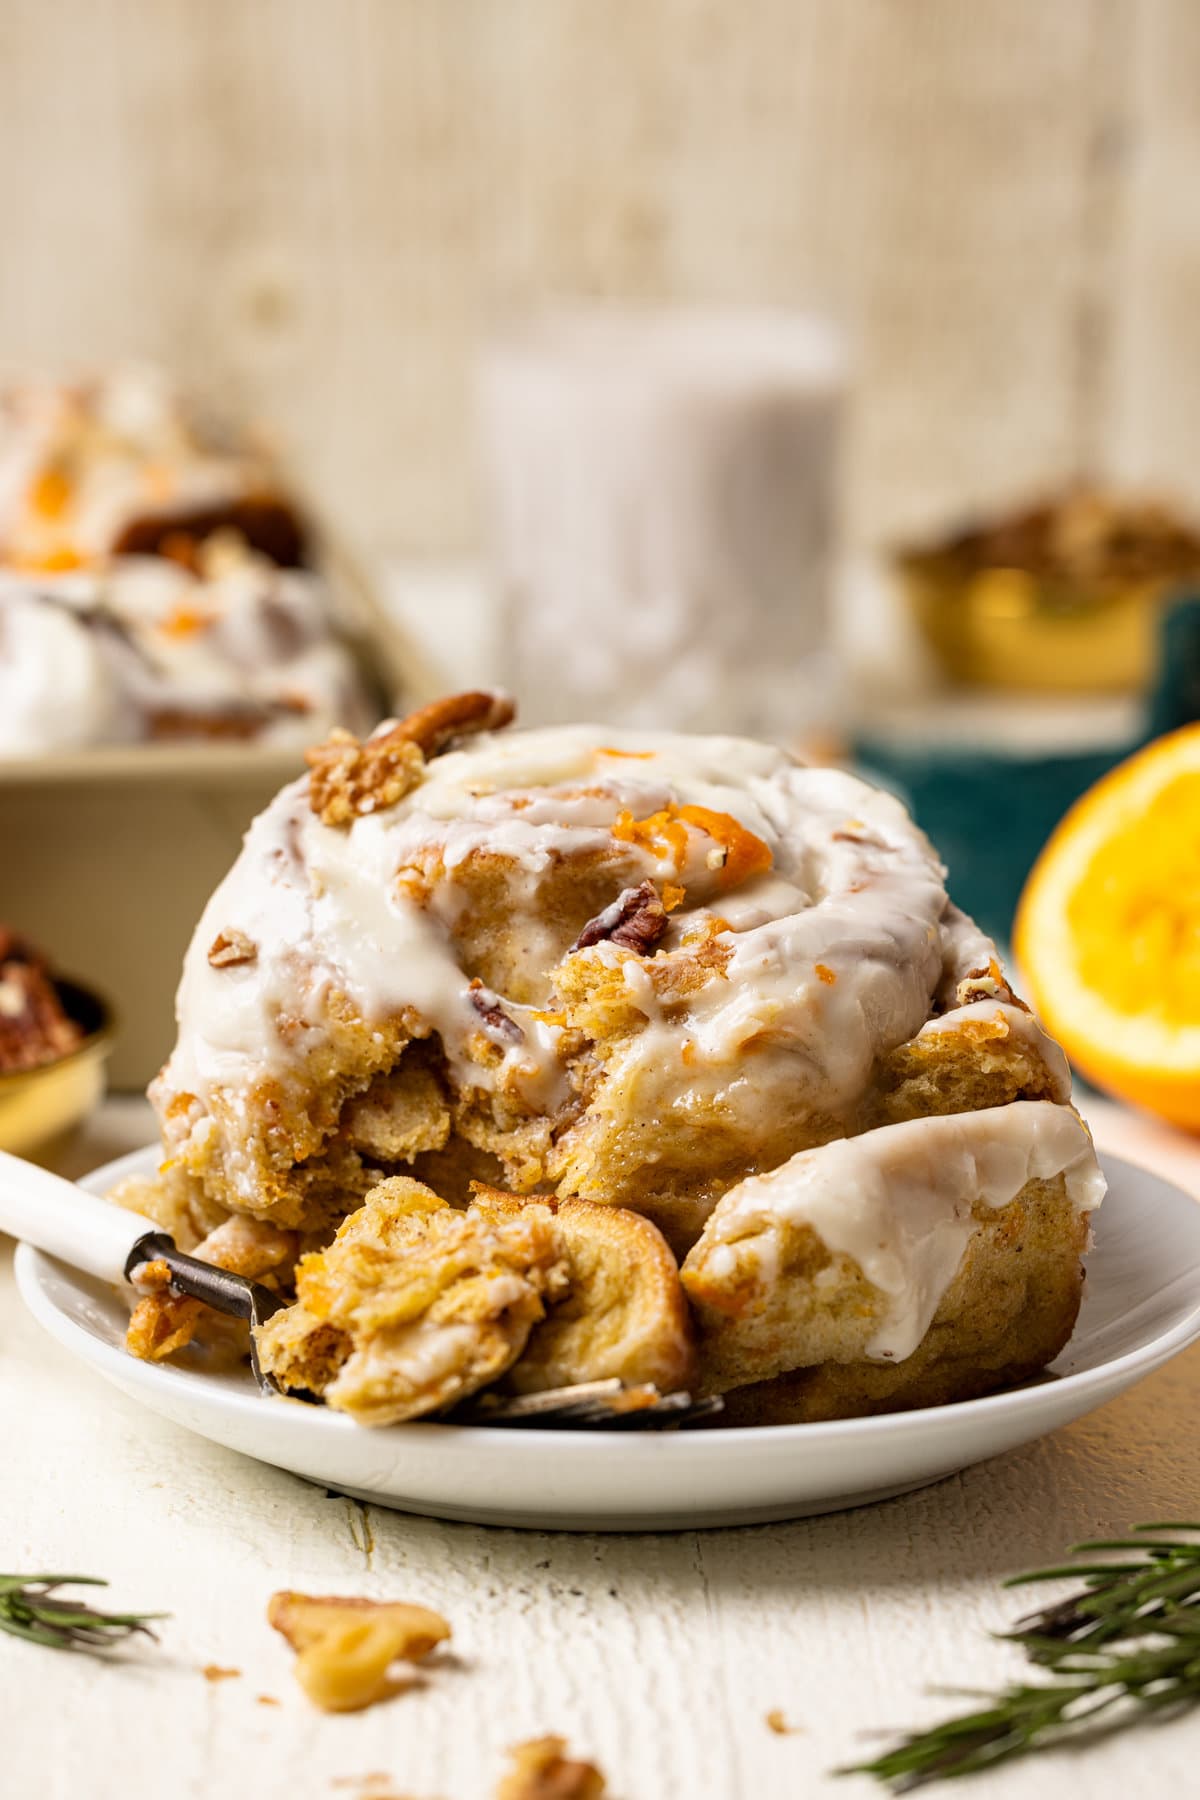 Southern-Style Carrot Cake Cinnamon Roll on a plate with a fork